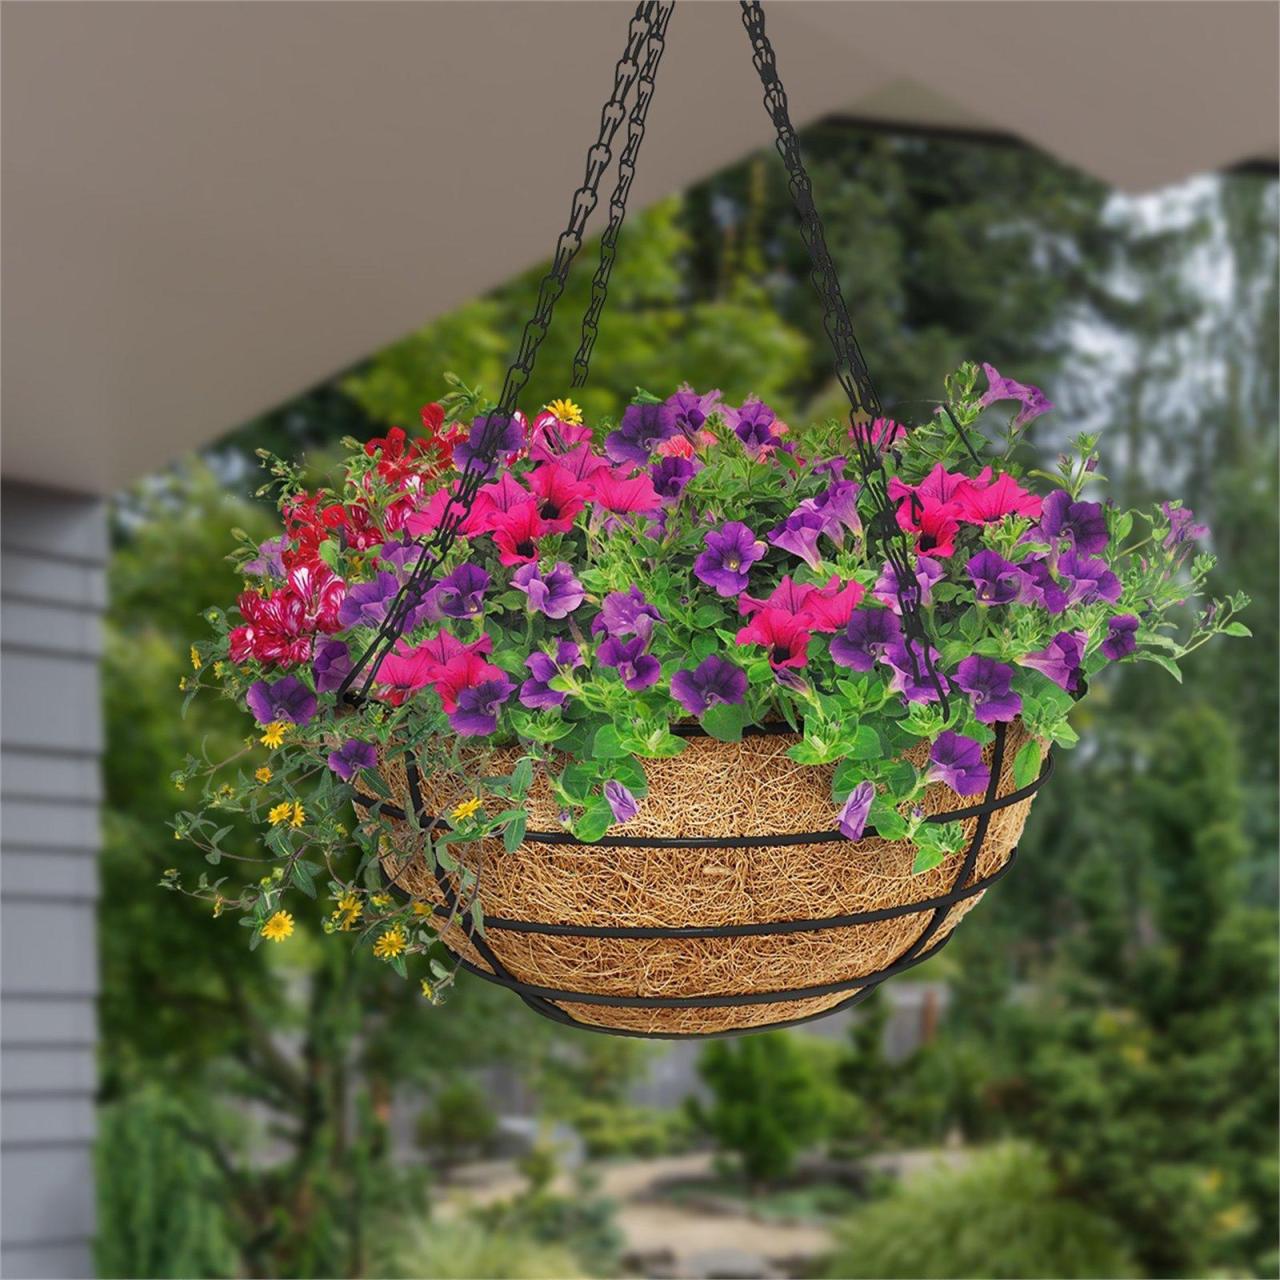 Hanging Plants Indoor | Bunnings Hanging Basket Plants: A Guide to Types, Selection, and Care